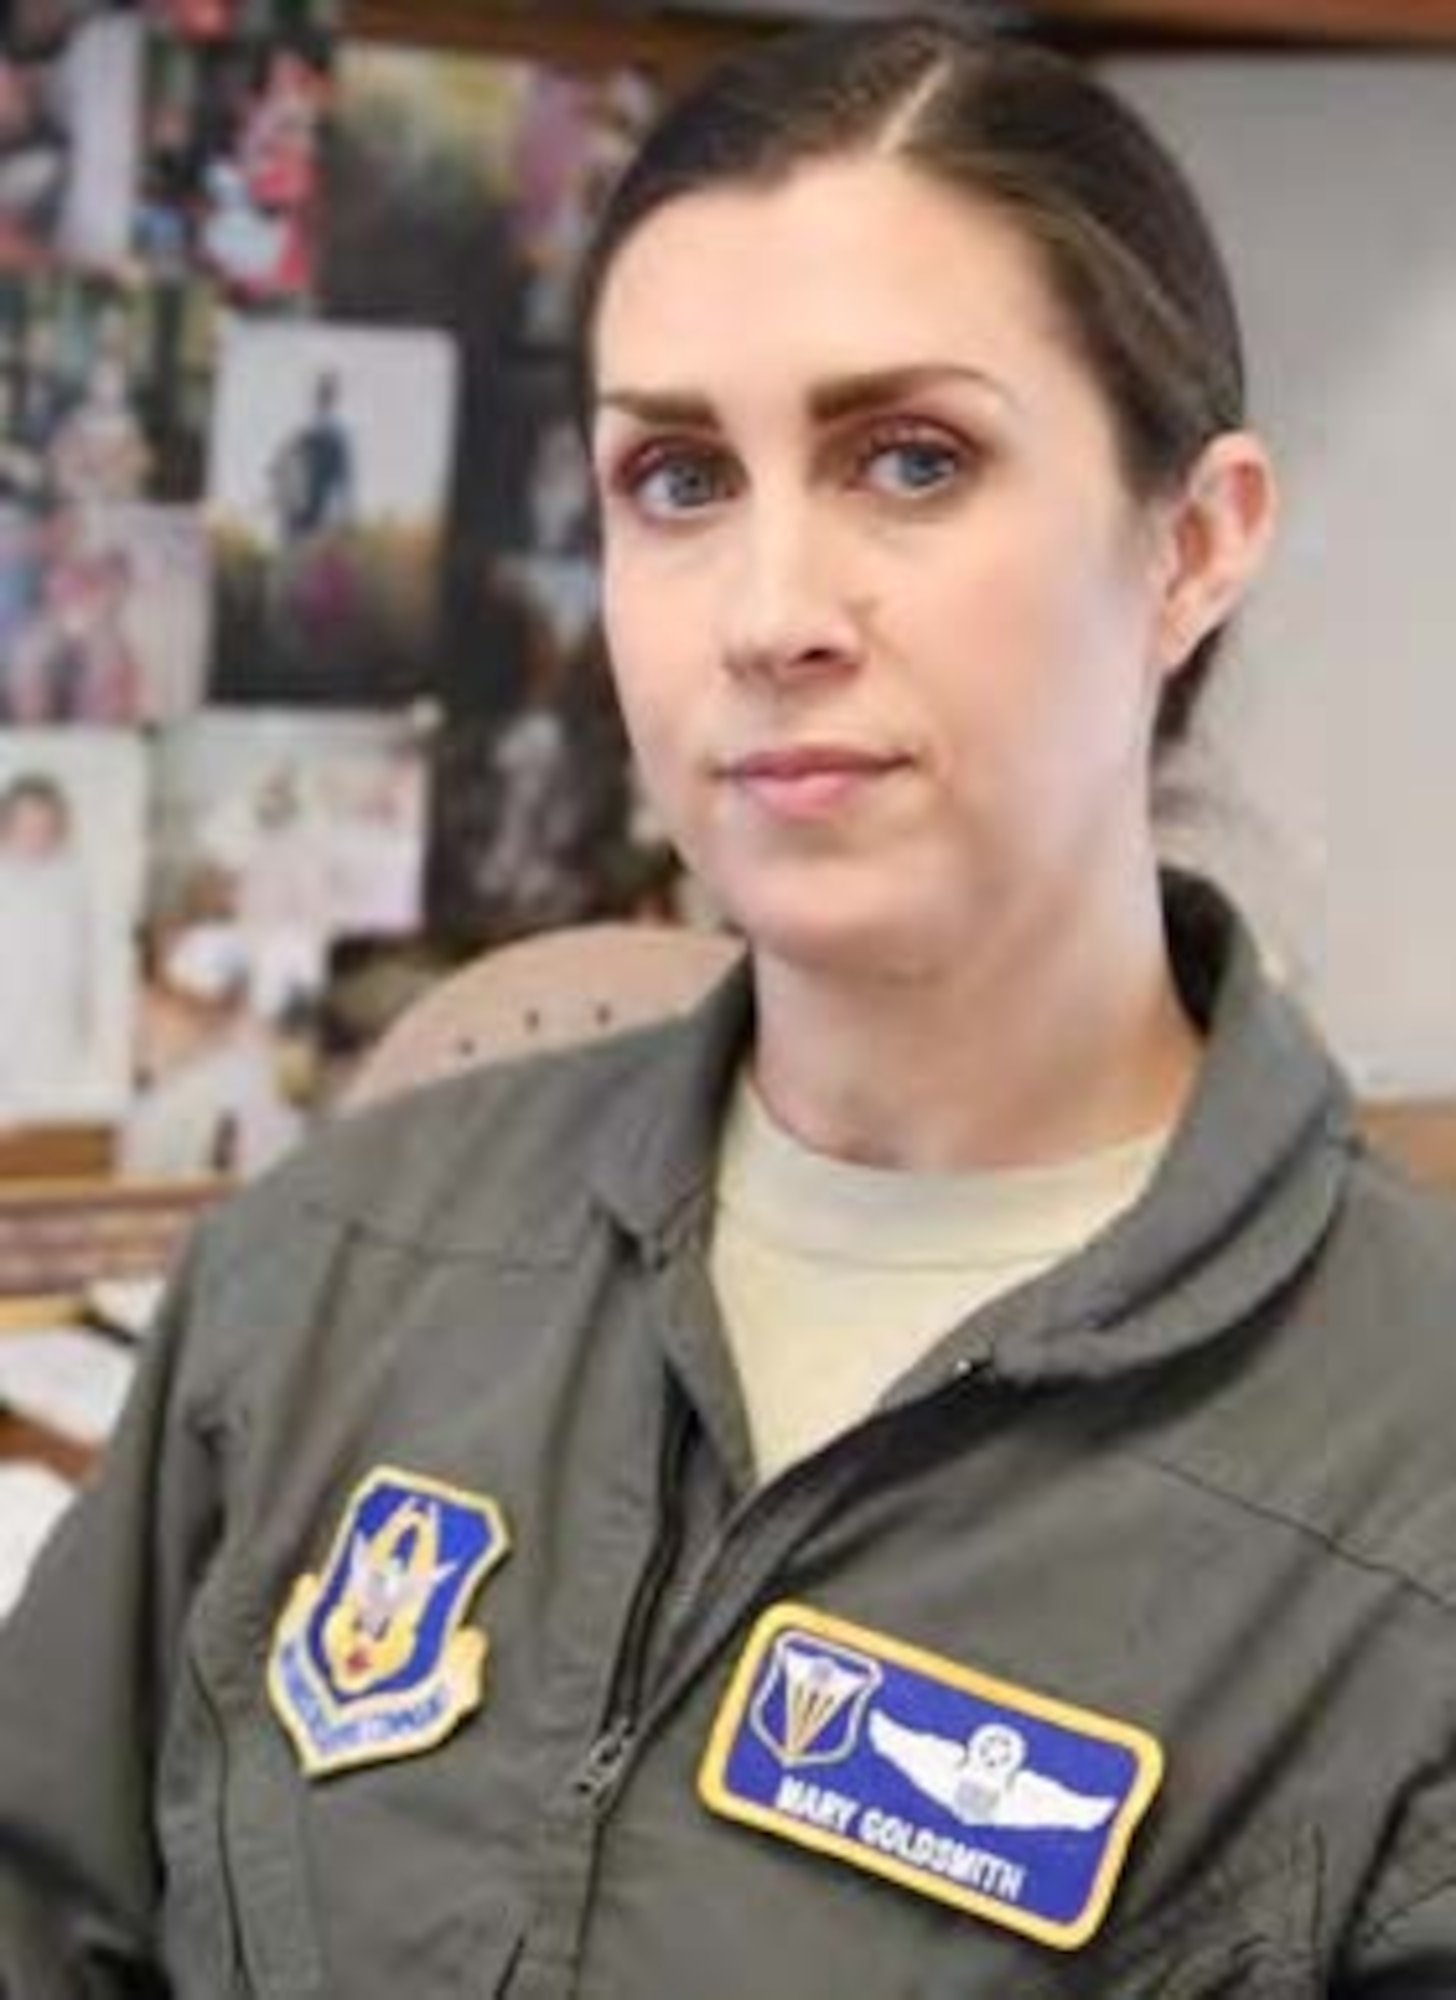 Lt. Col. Mary Goldsmith is the Chief of Training for 4th Air Force's Operations, Plans and Requirements directorate at March Air Reserve Base, California. (U.S. Air Force photo by Candy Knight)